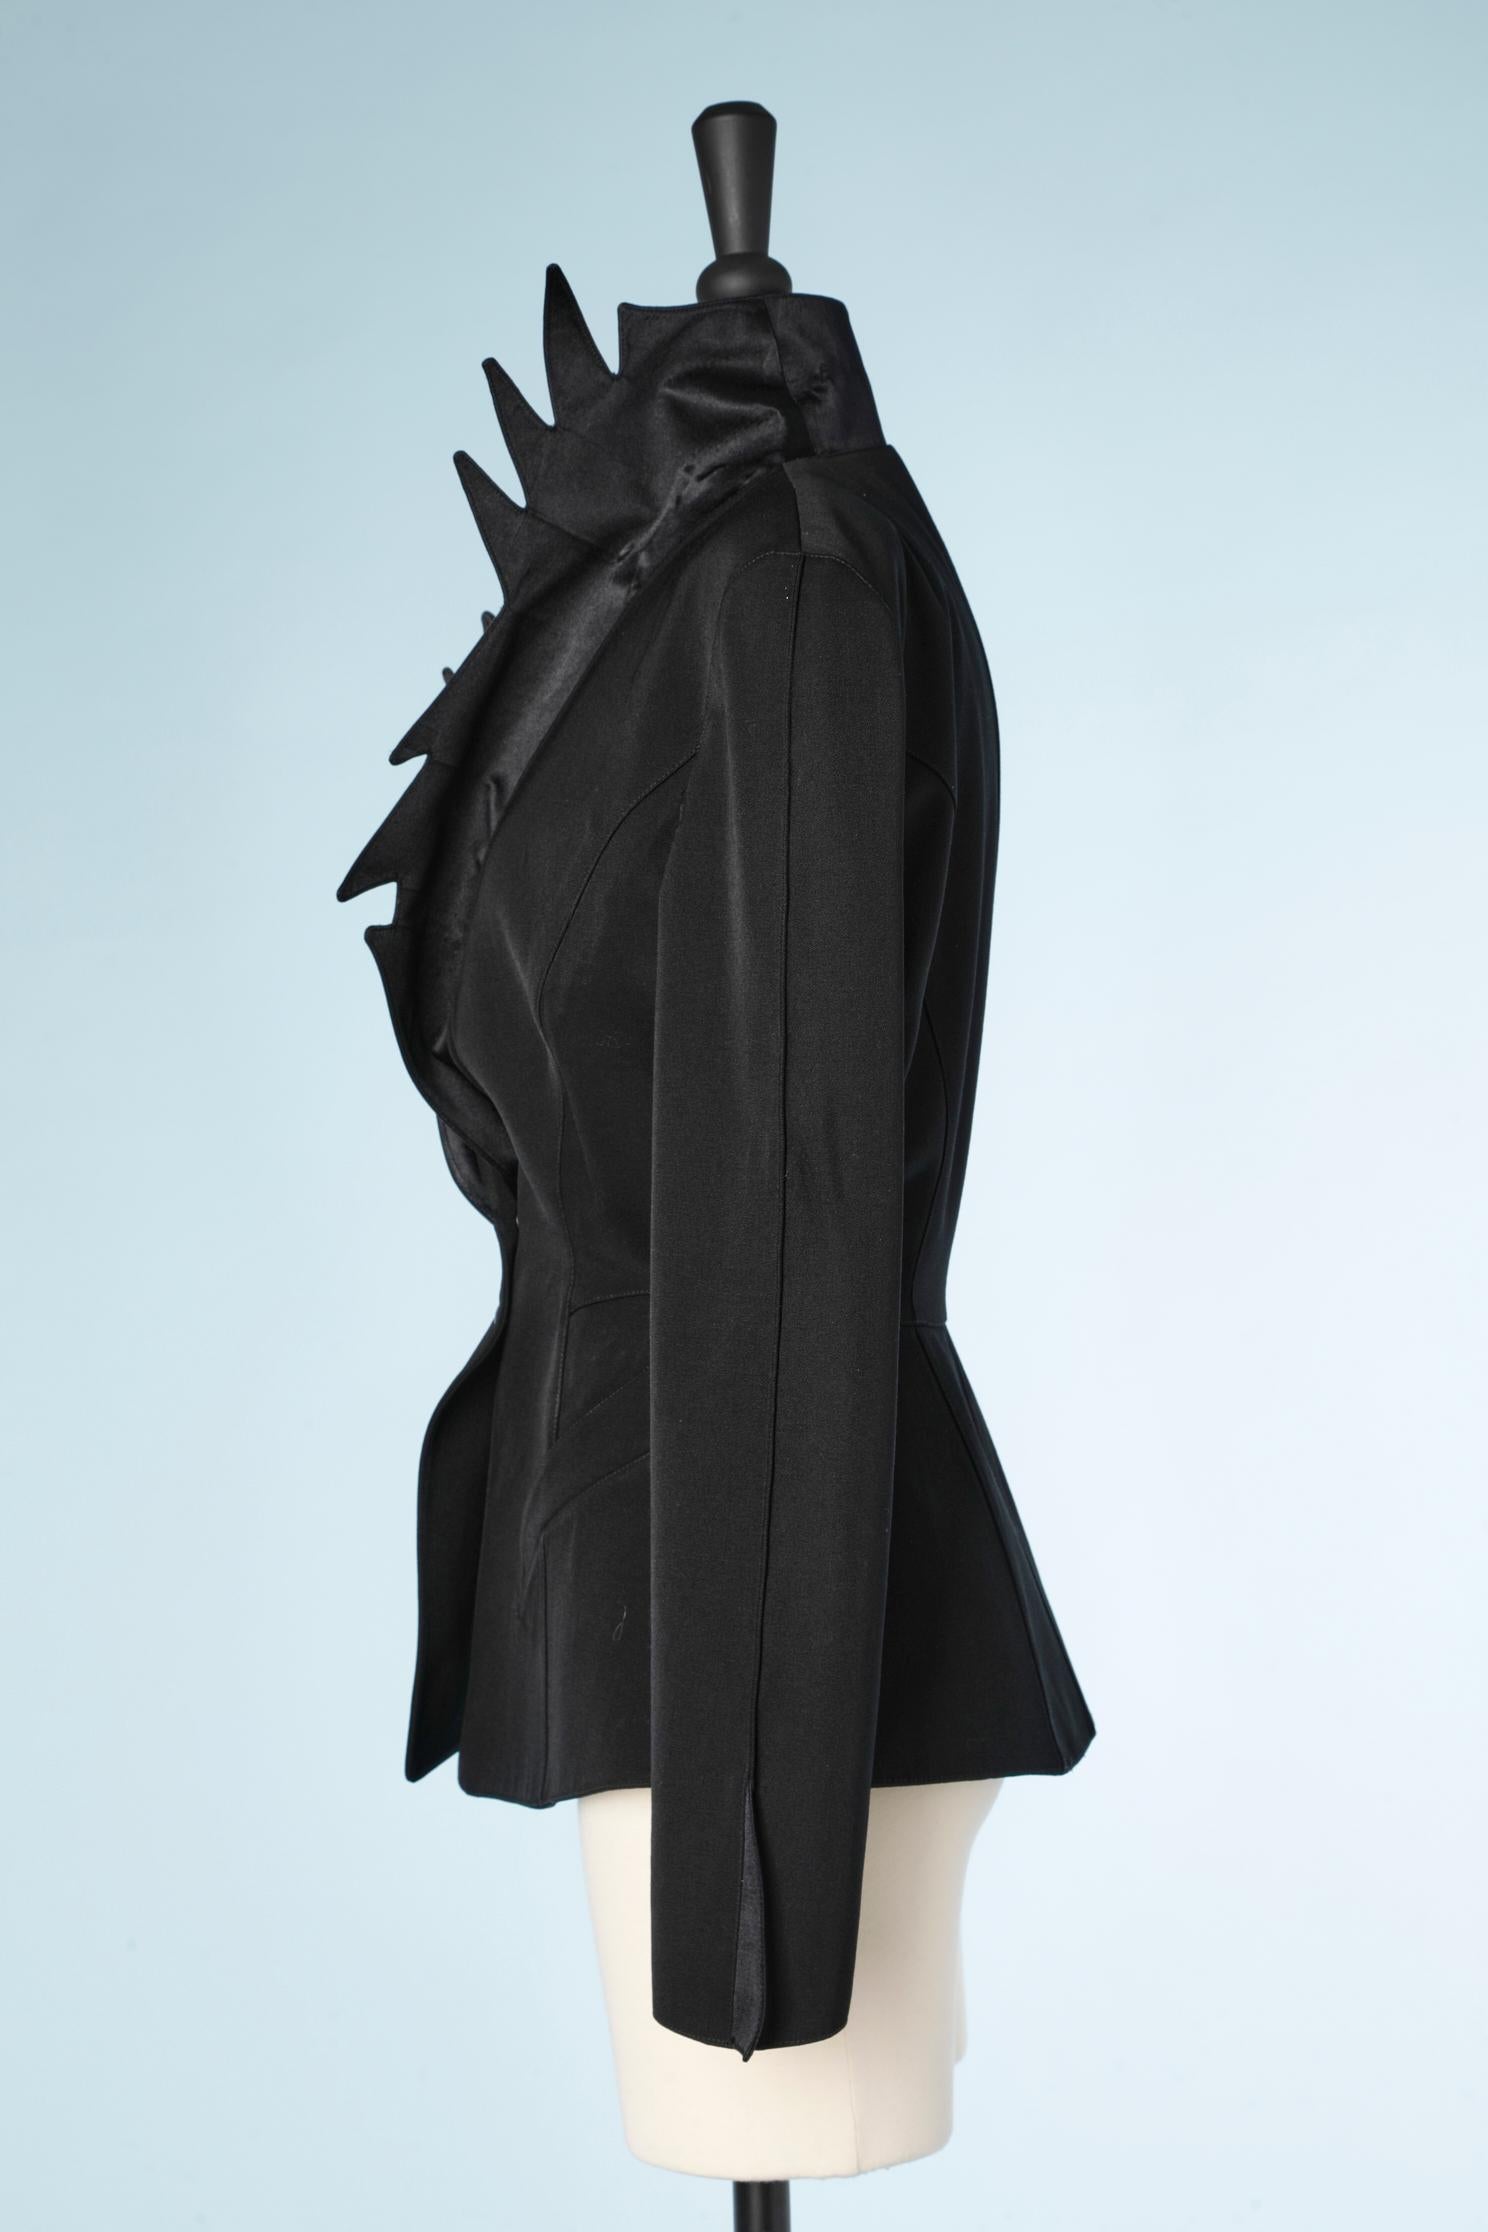  Black jacket with notched satin collar  Thierry Mugler  For Sale 3